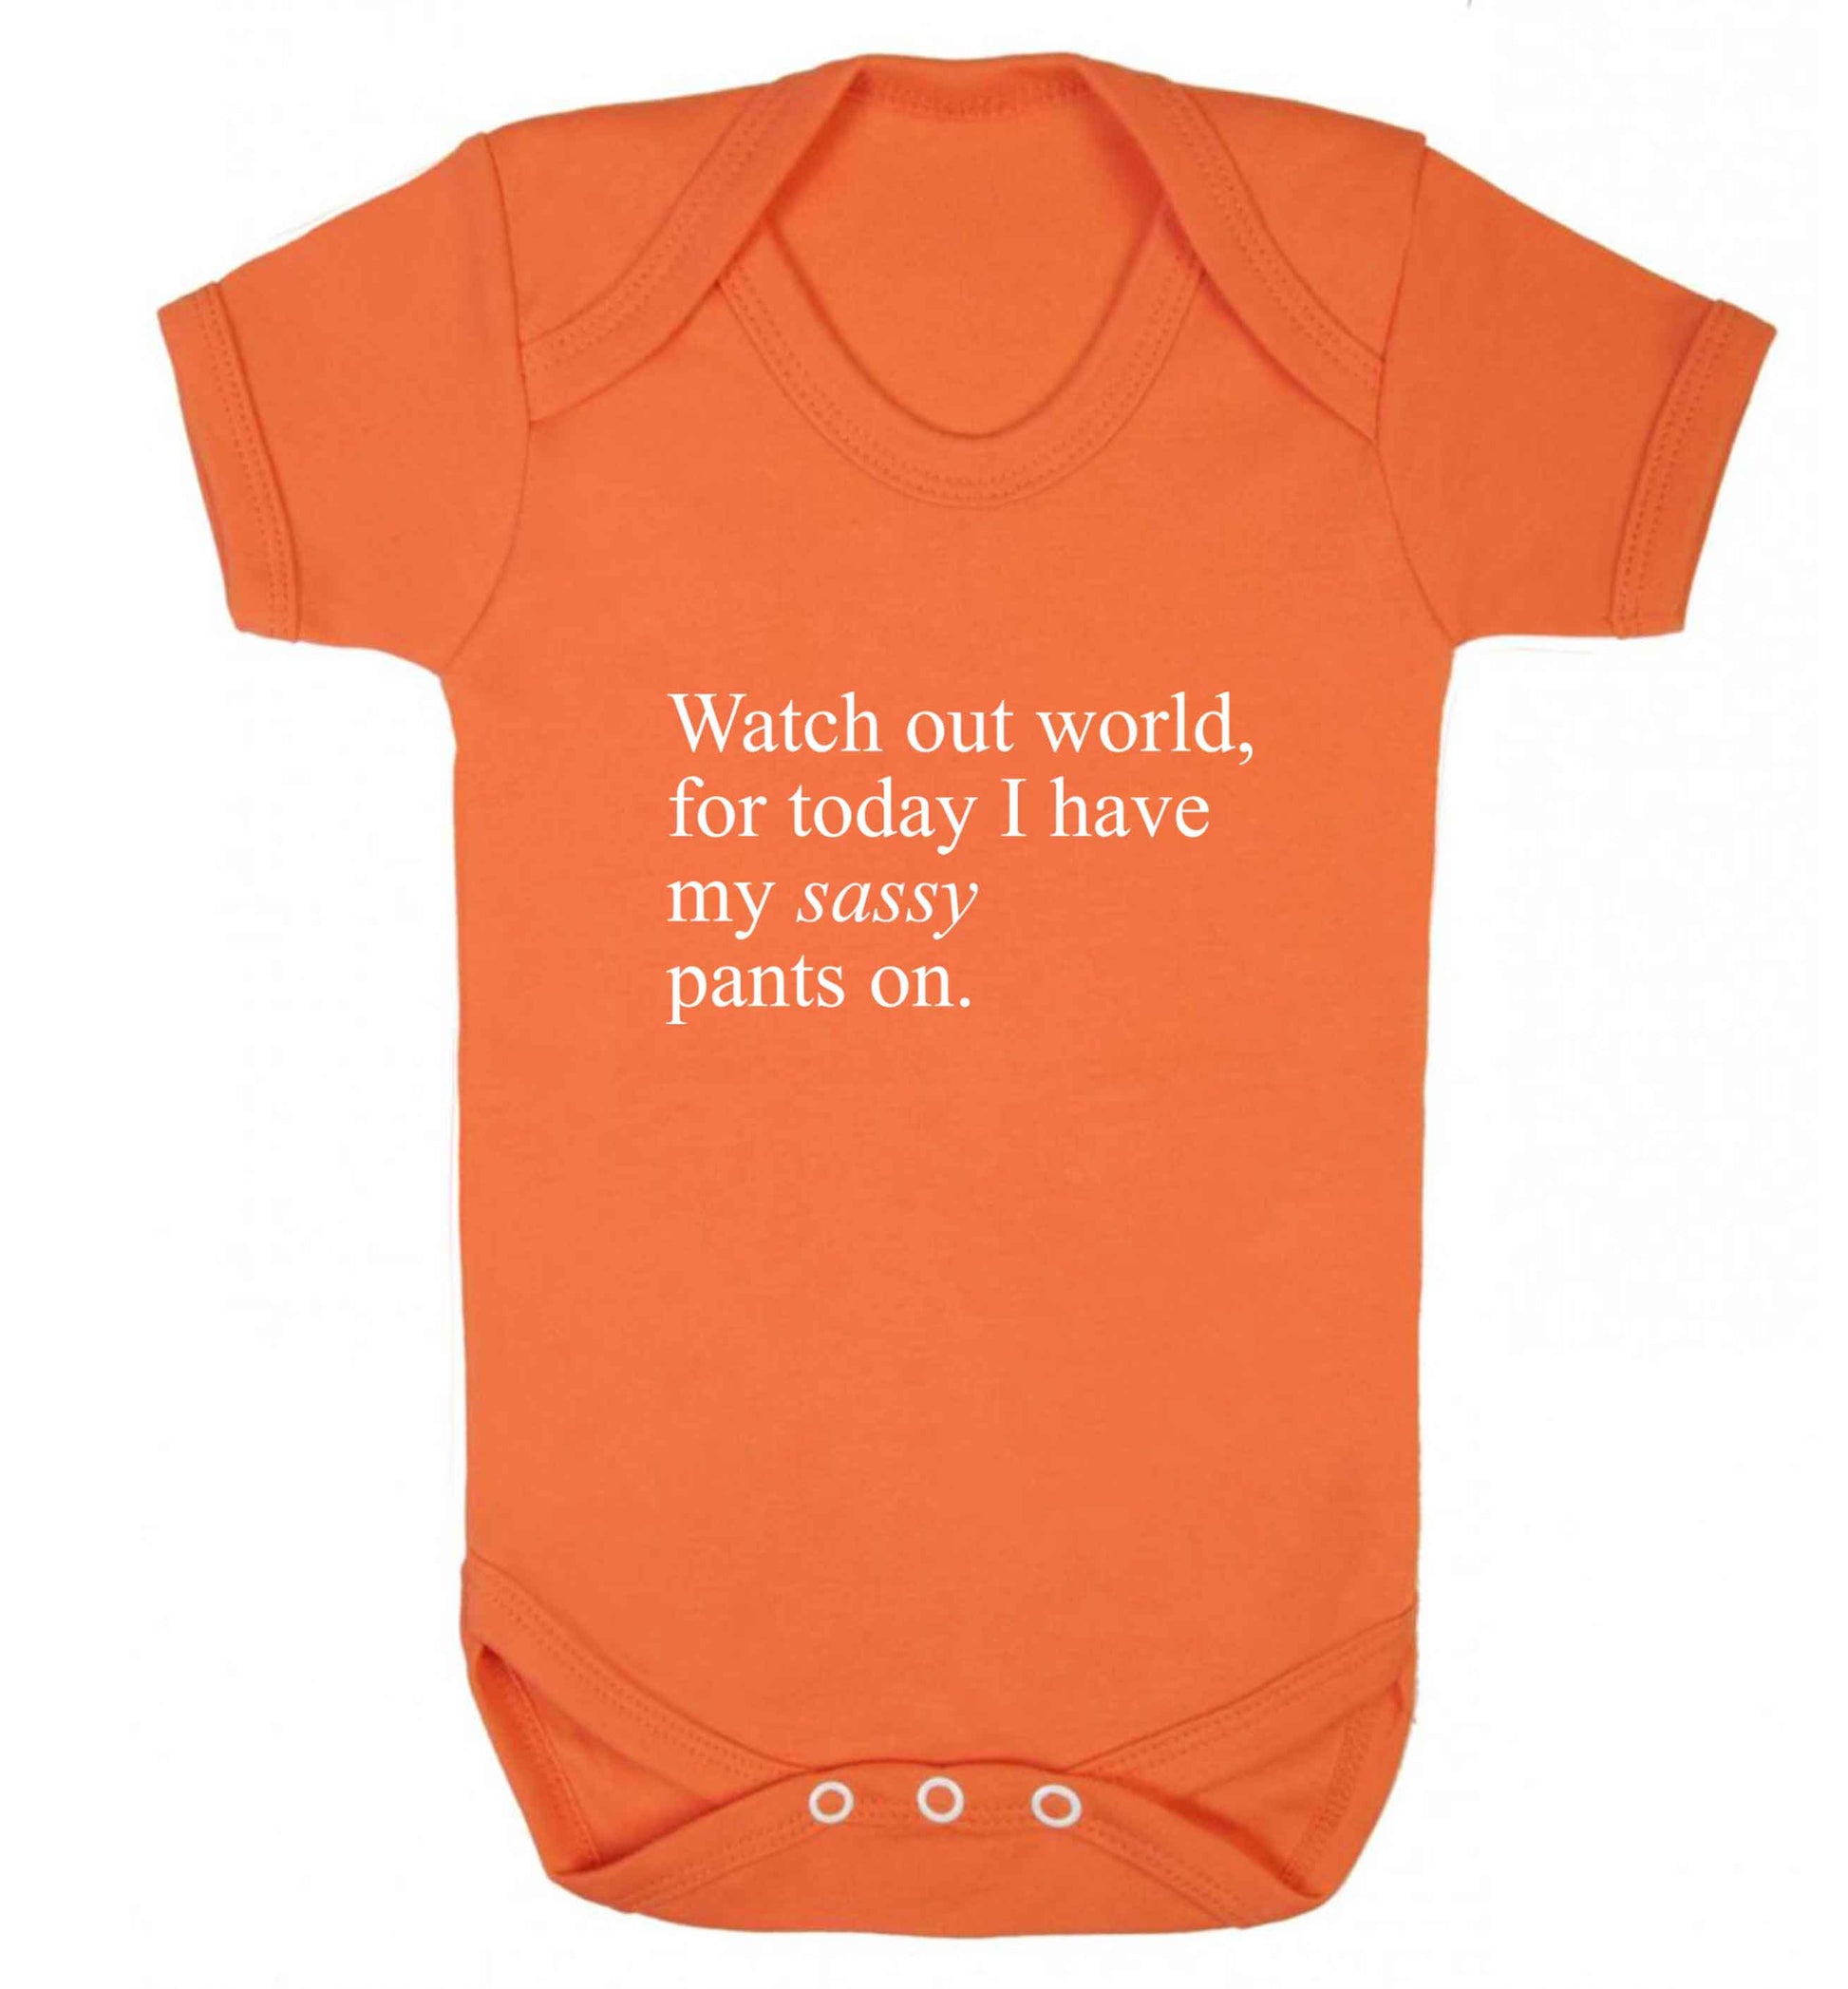 Watch out world for today I have my sassy pants on baby vest orange 18-24 months